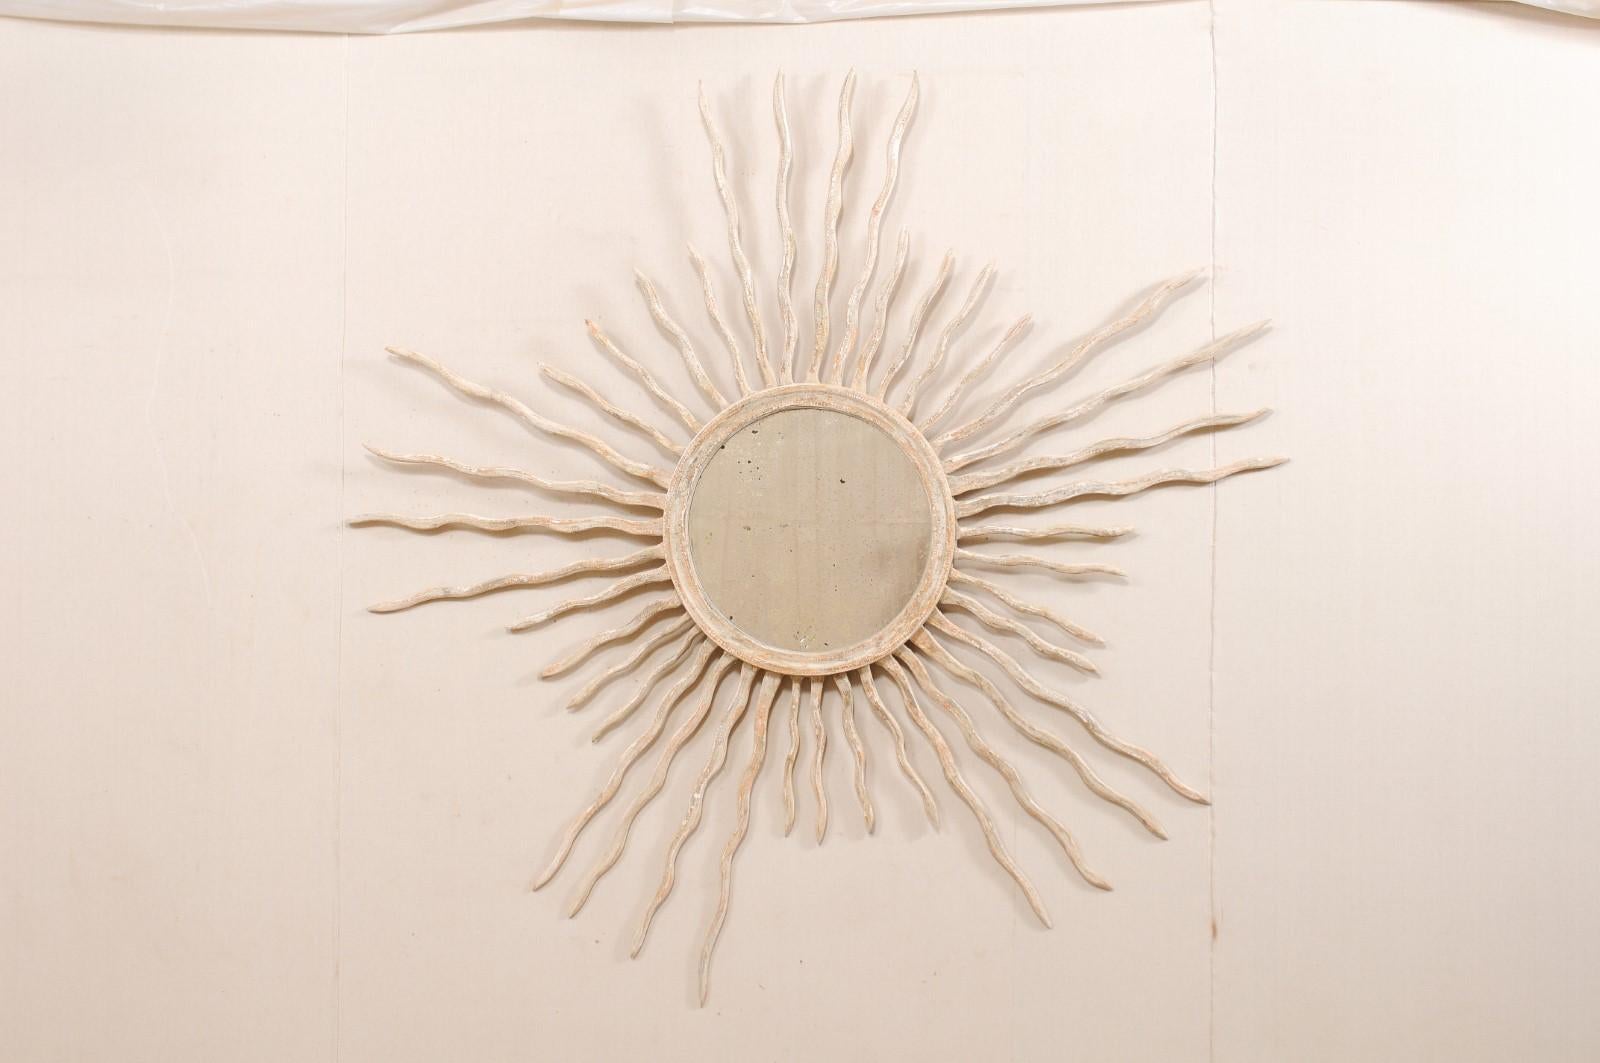 A large sized Italian round mirror with sunburst surround. This custom mirror from Italy, designed by an artisan crafter, features a round-shaped and antiqued center glass, with is set within a wood surround which bursts with rays extending outward